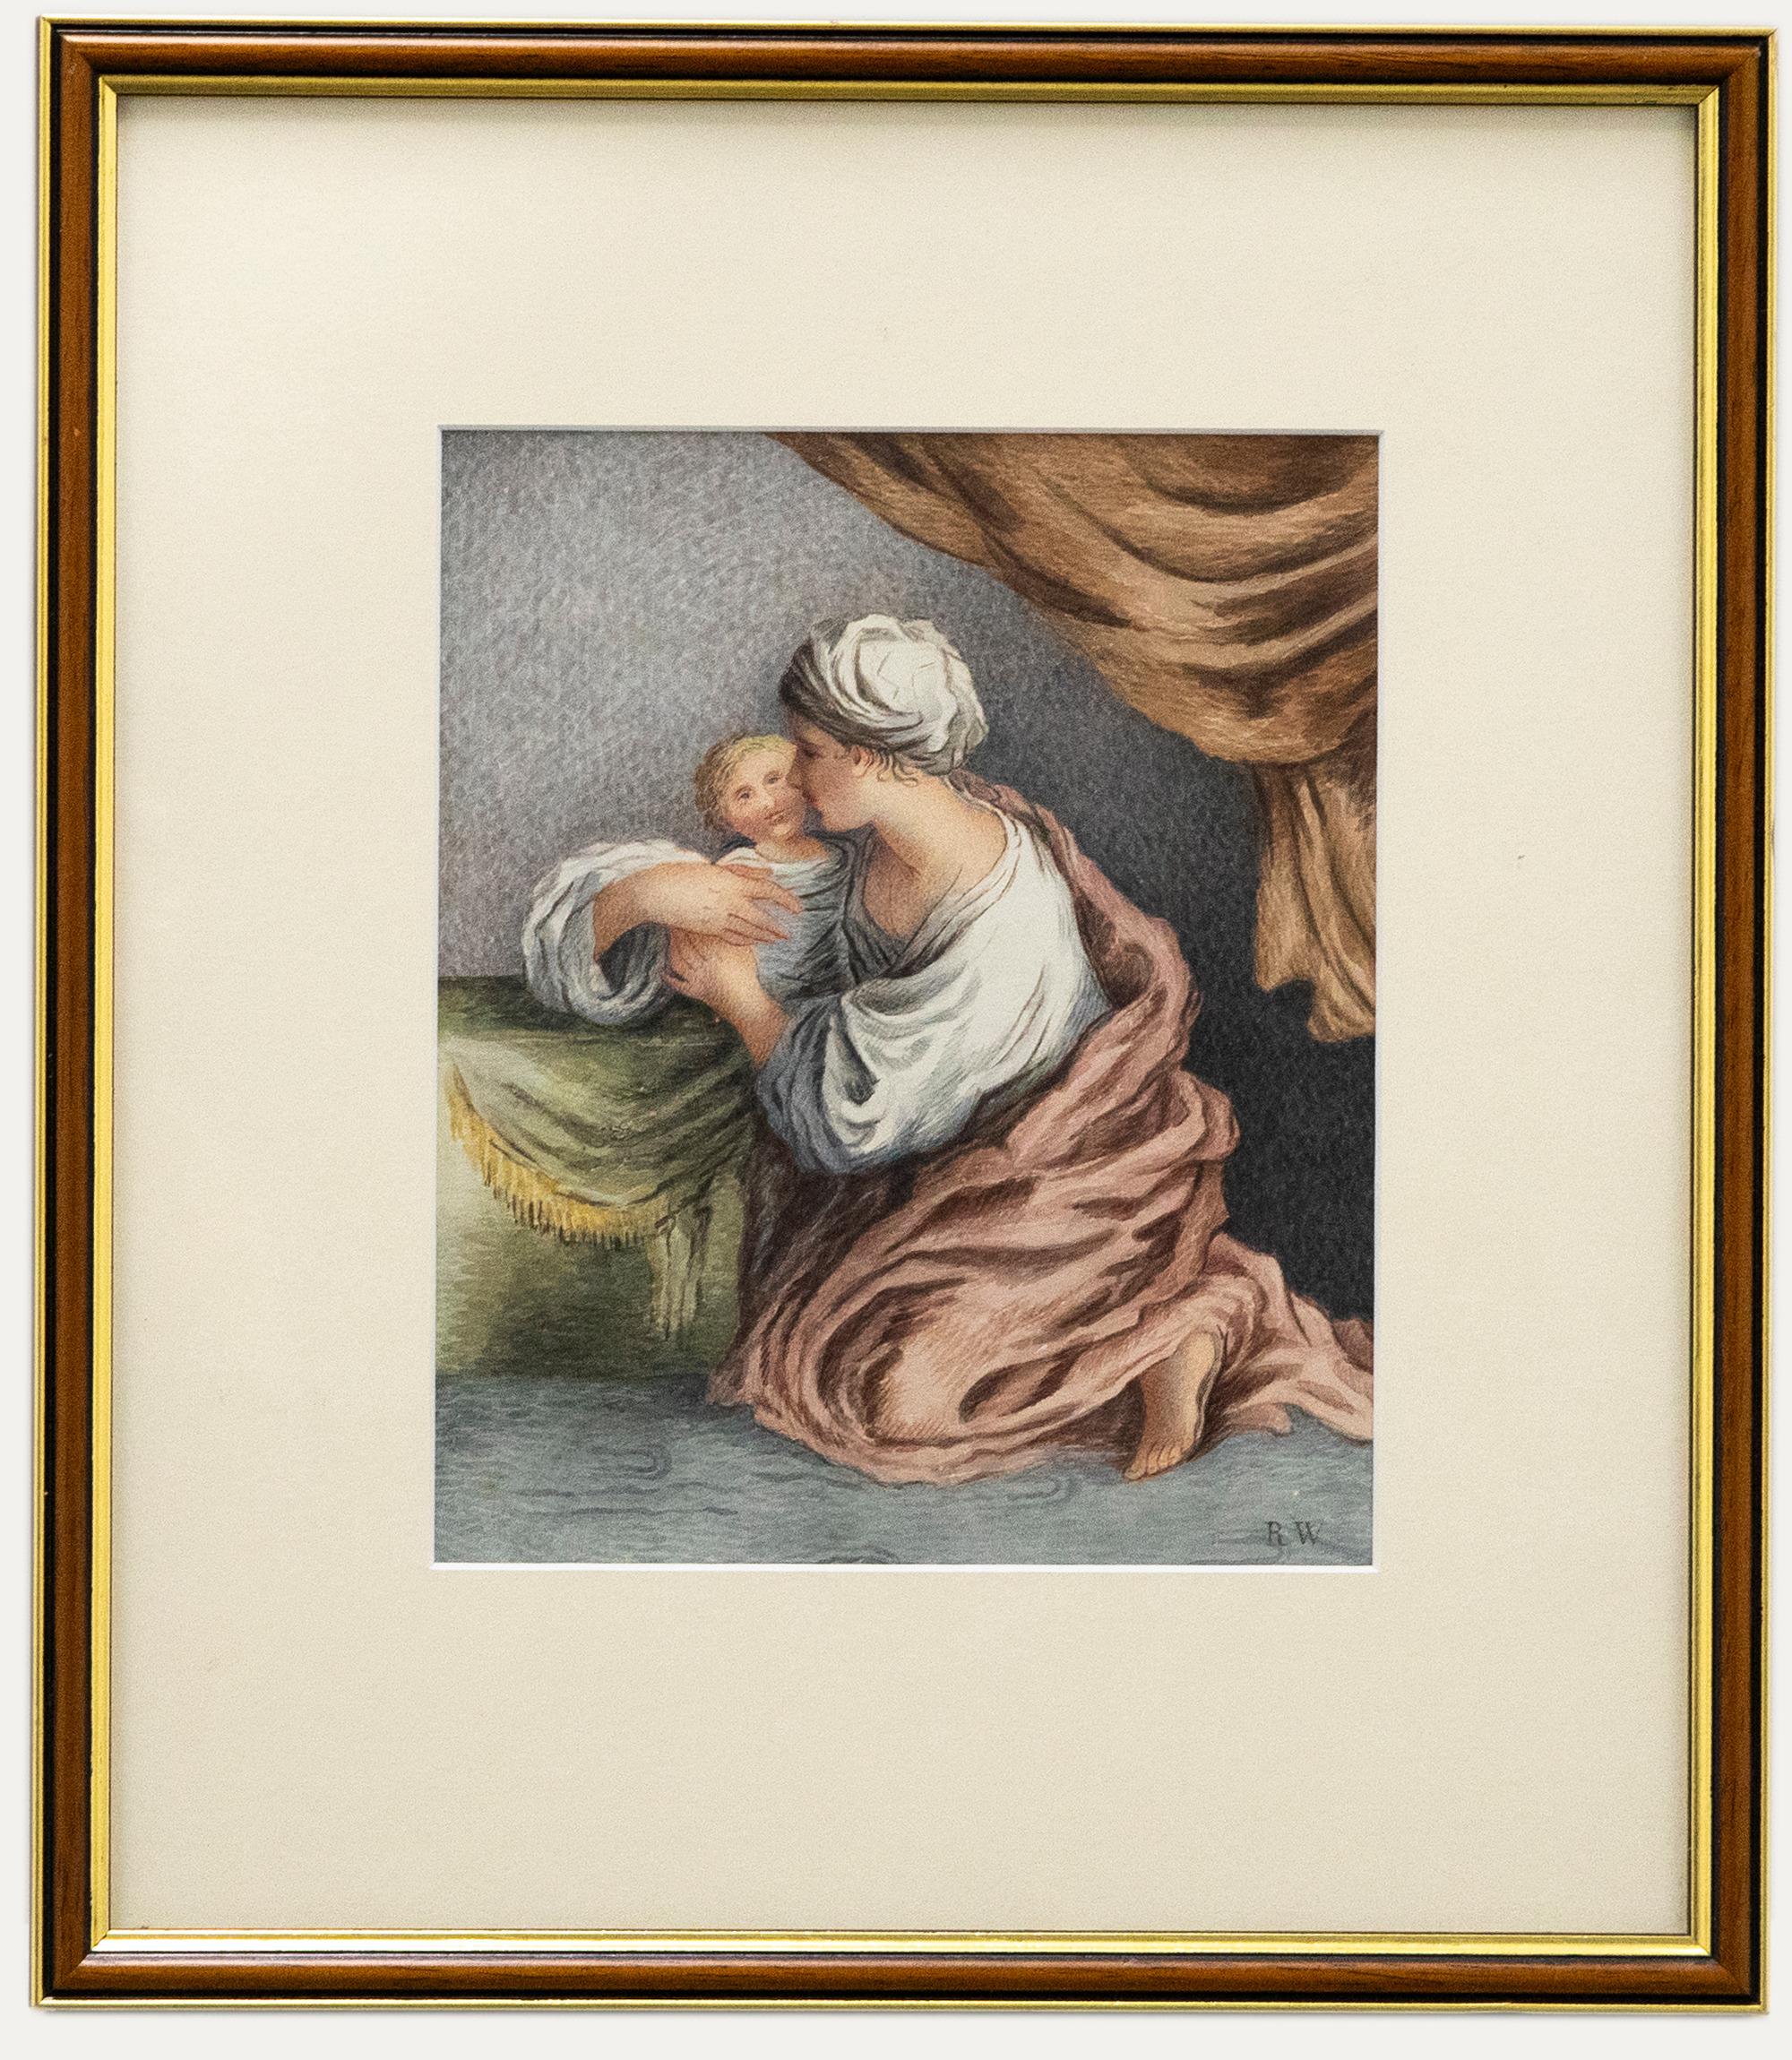 A fine watercolour study depicting a mother embracing her infant child. The artist's accomplished hand captures the fine drapery covery the woman, showing the folds of the material in great detail. Signed with Westall's monogram to the lower right.